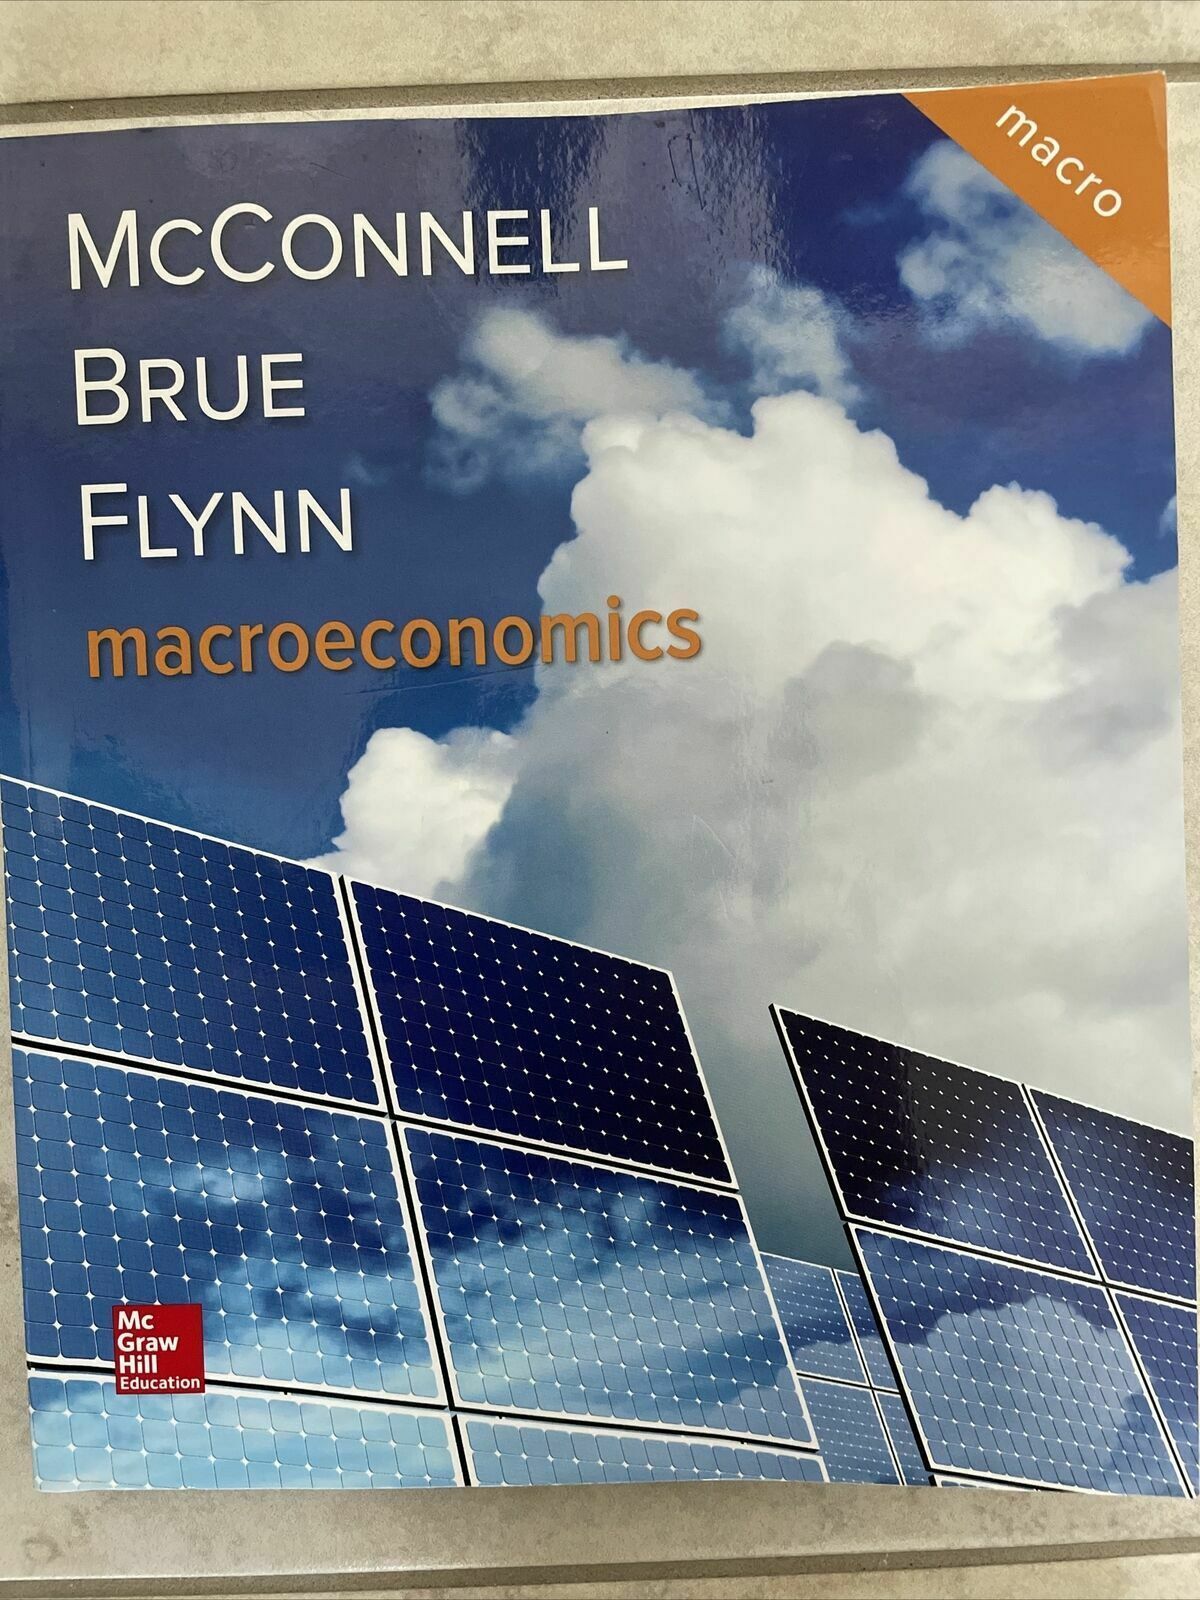 Primary image for Macroeconomics Principles, Problems, And Policies, Mcconnell, Brue, Flynn